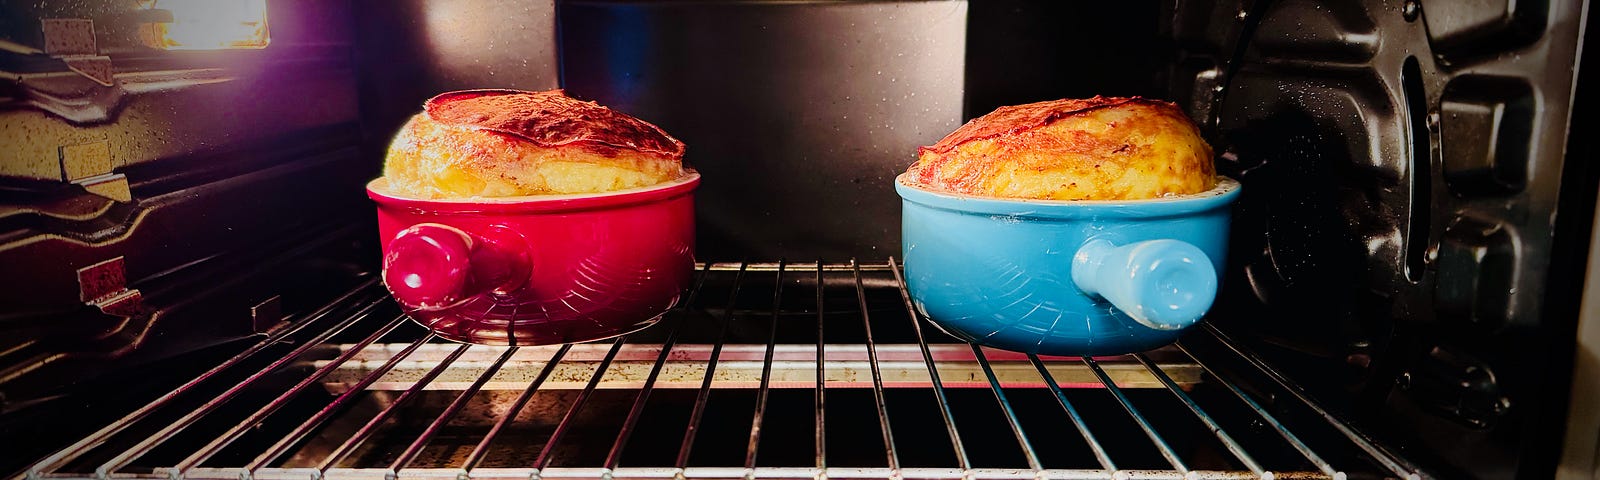 Two French Onion soup bowls in the oven. Cheese soufflé is rising hign above the rim.